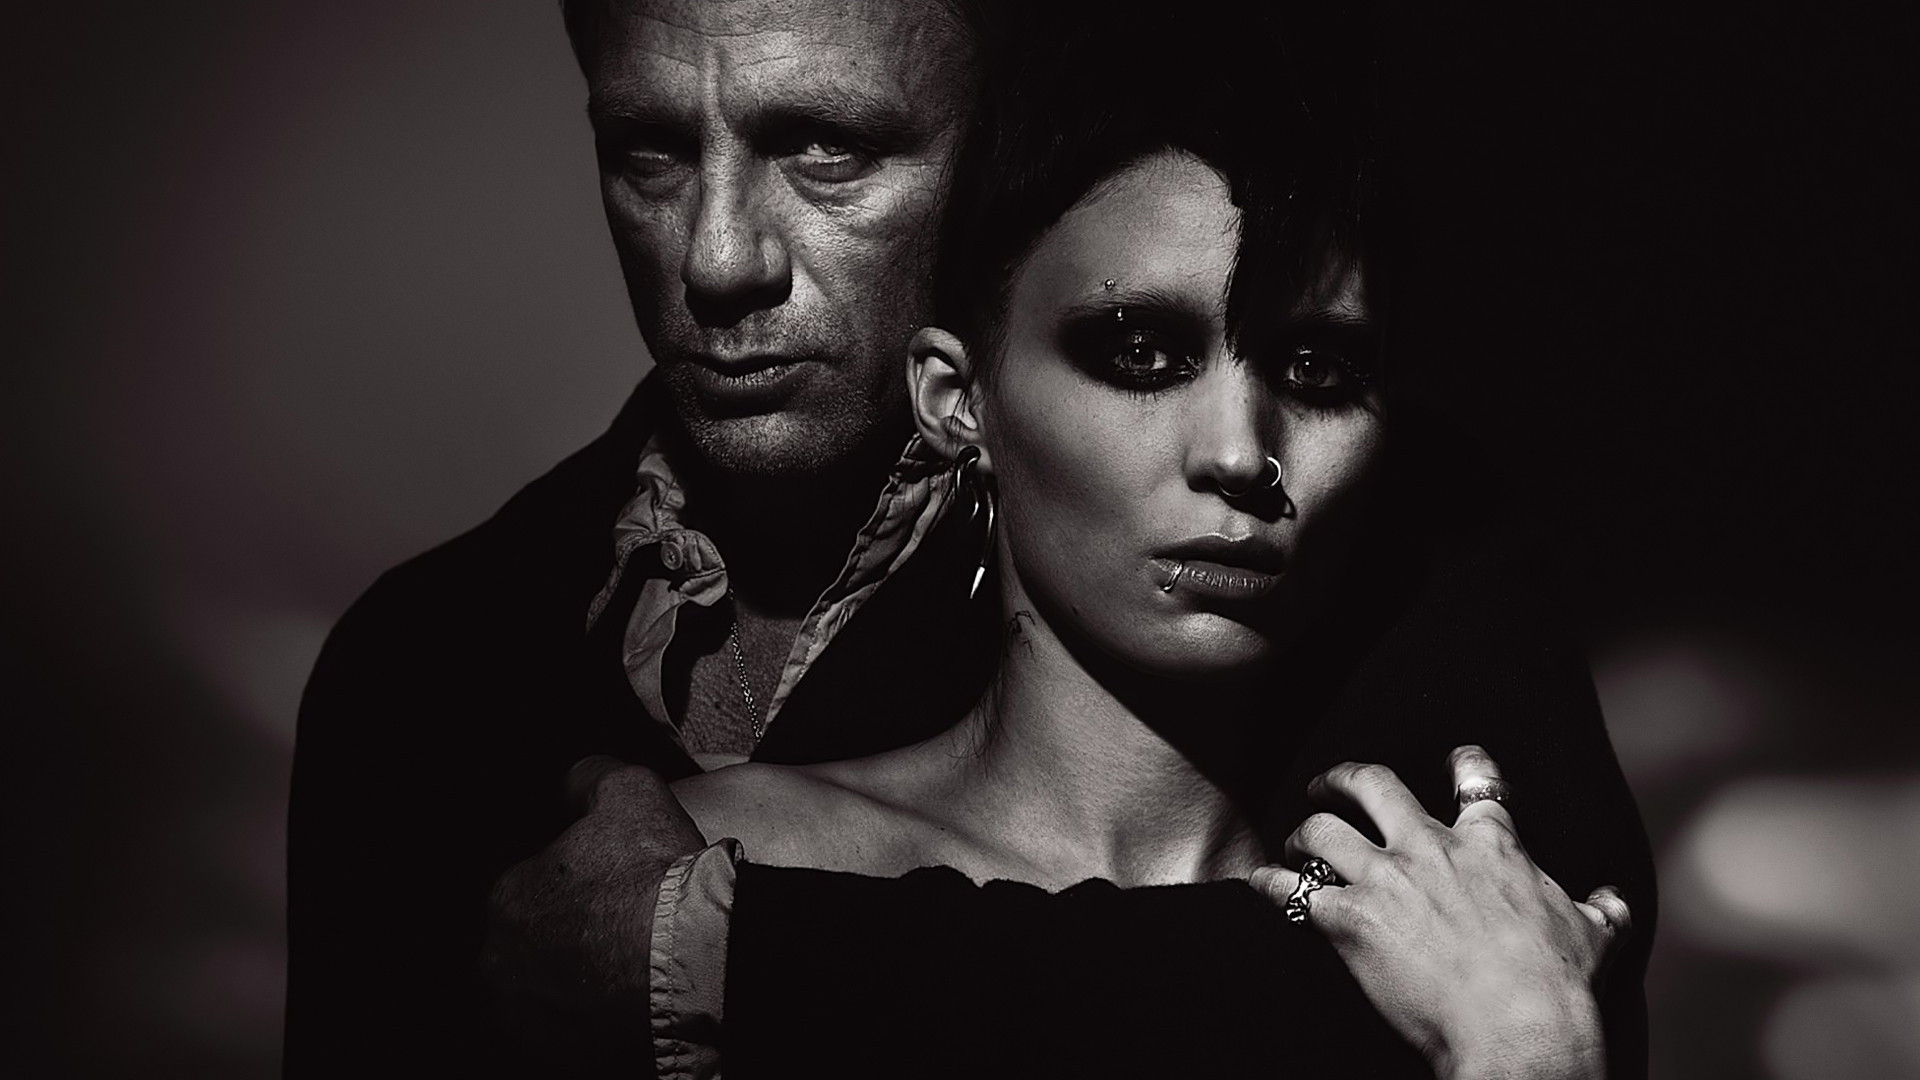 8. "The Girl with the Dragon Tattoo" (2011) - wide 4